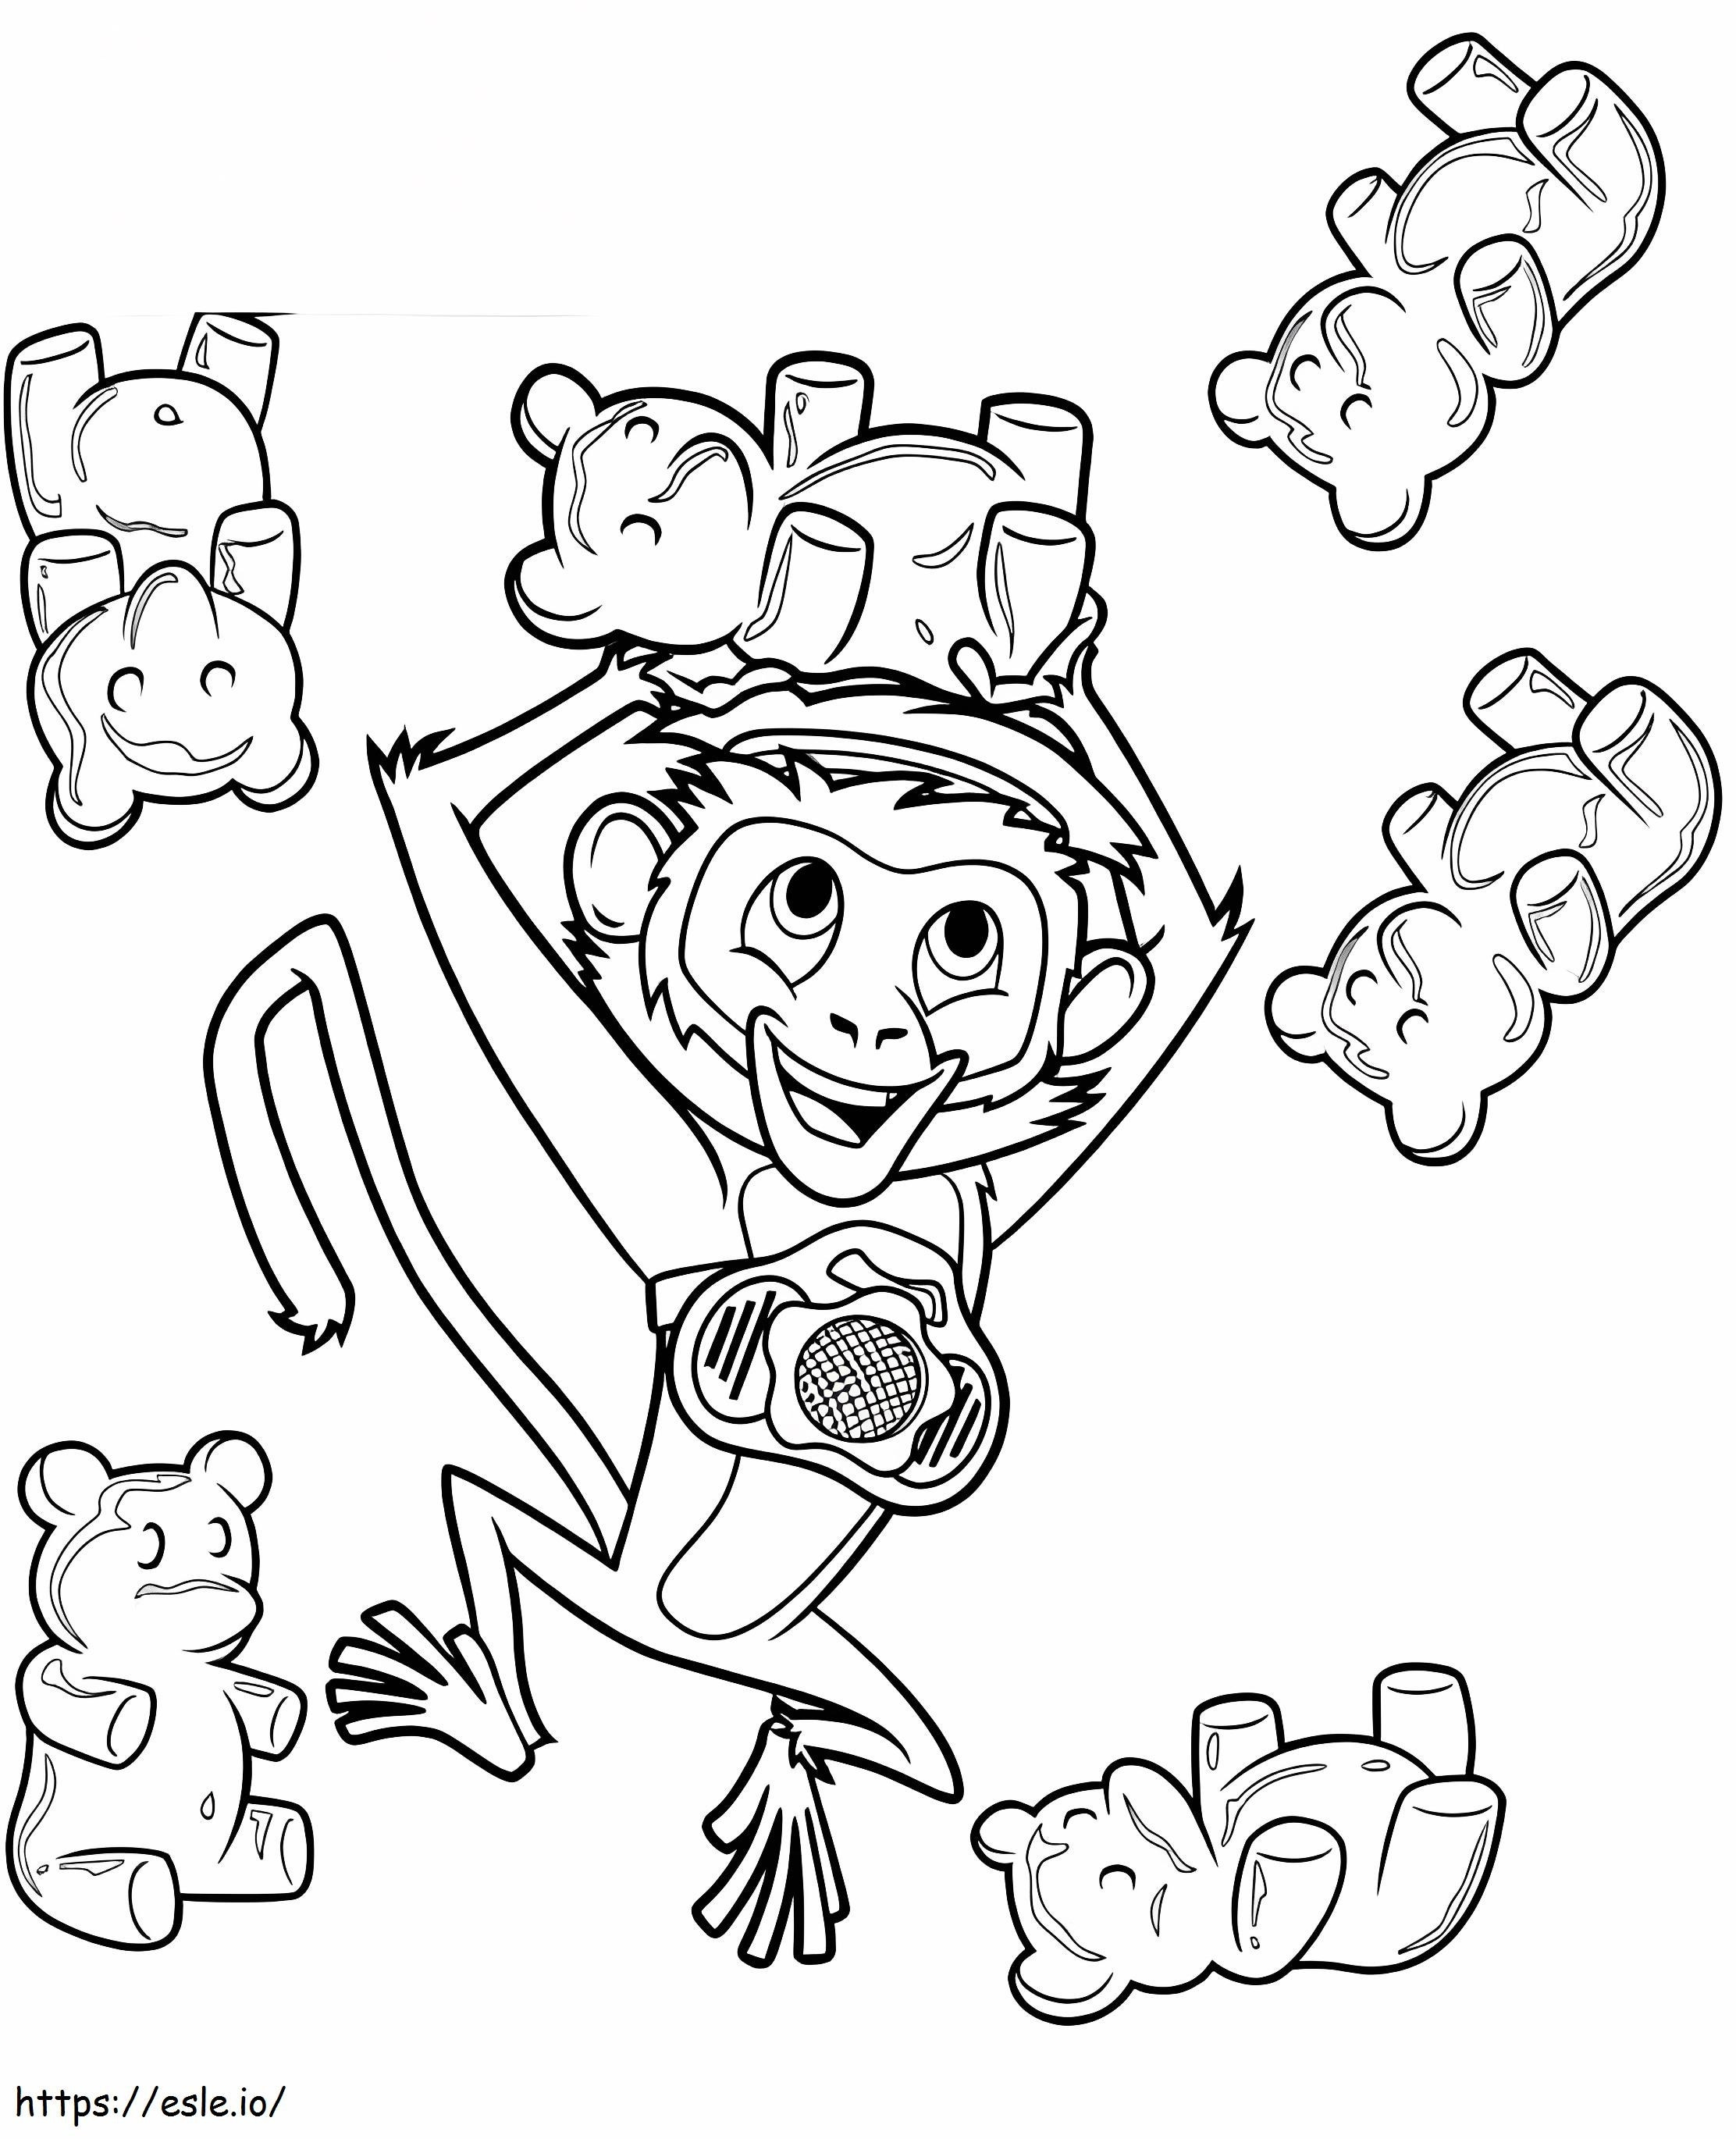 Cloudy With A Chance Of Meatballs 1 coloring page